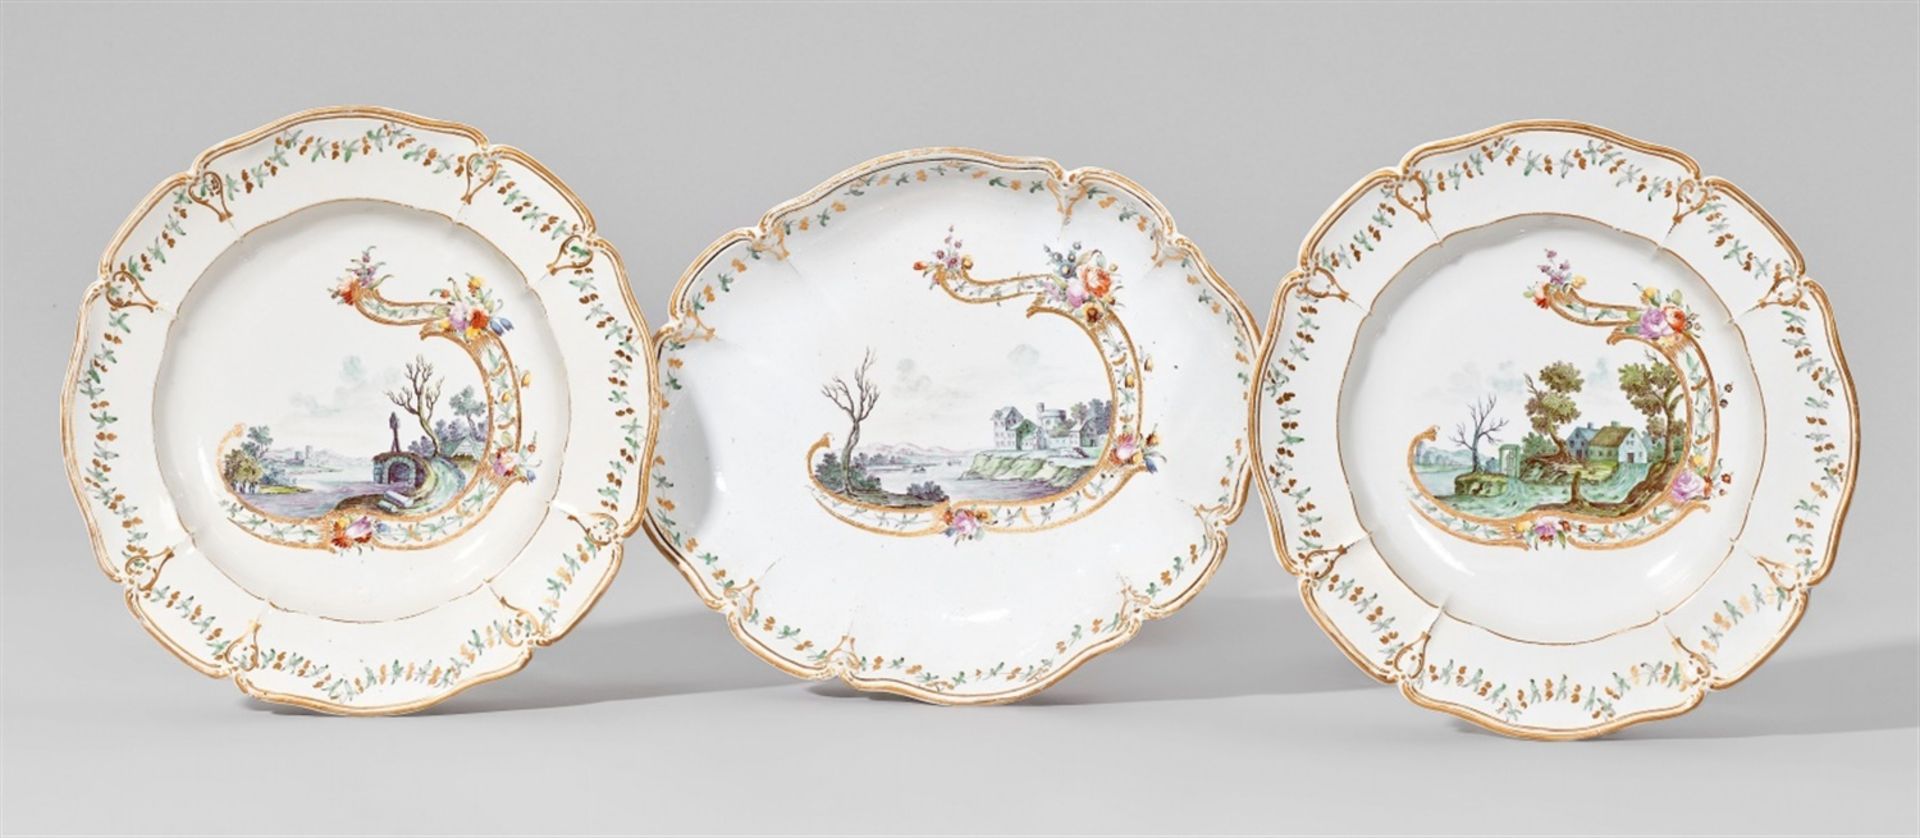 An oval Nymphenburg porcelain dish and two plates with green landscapesScalloped form with a